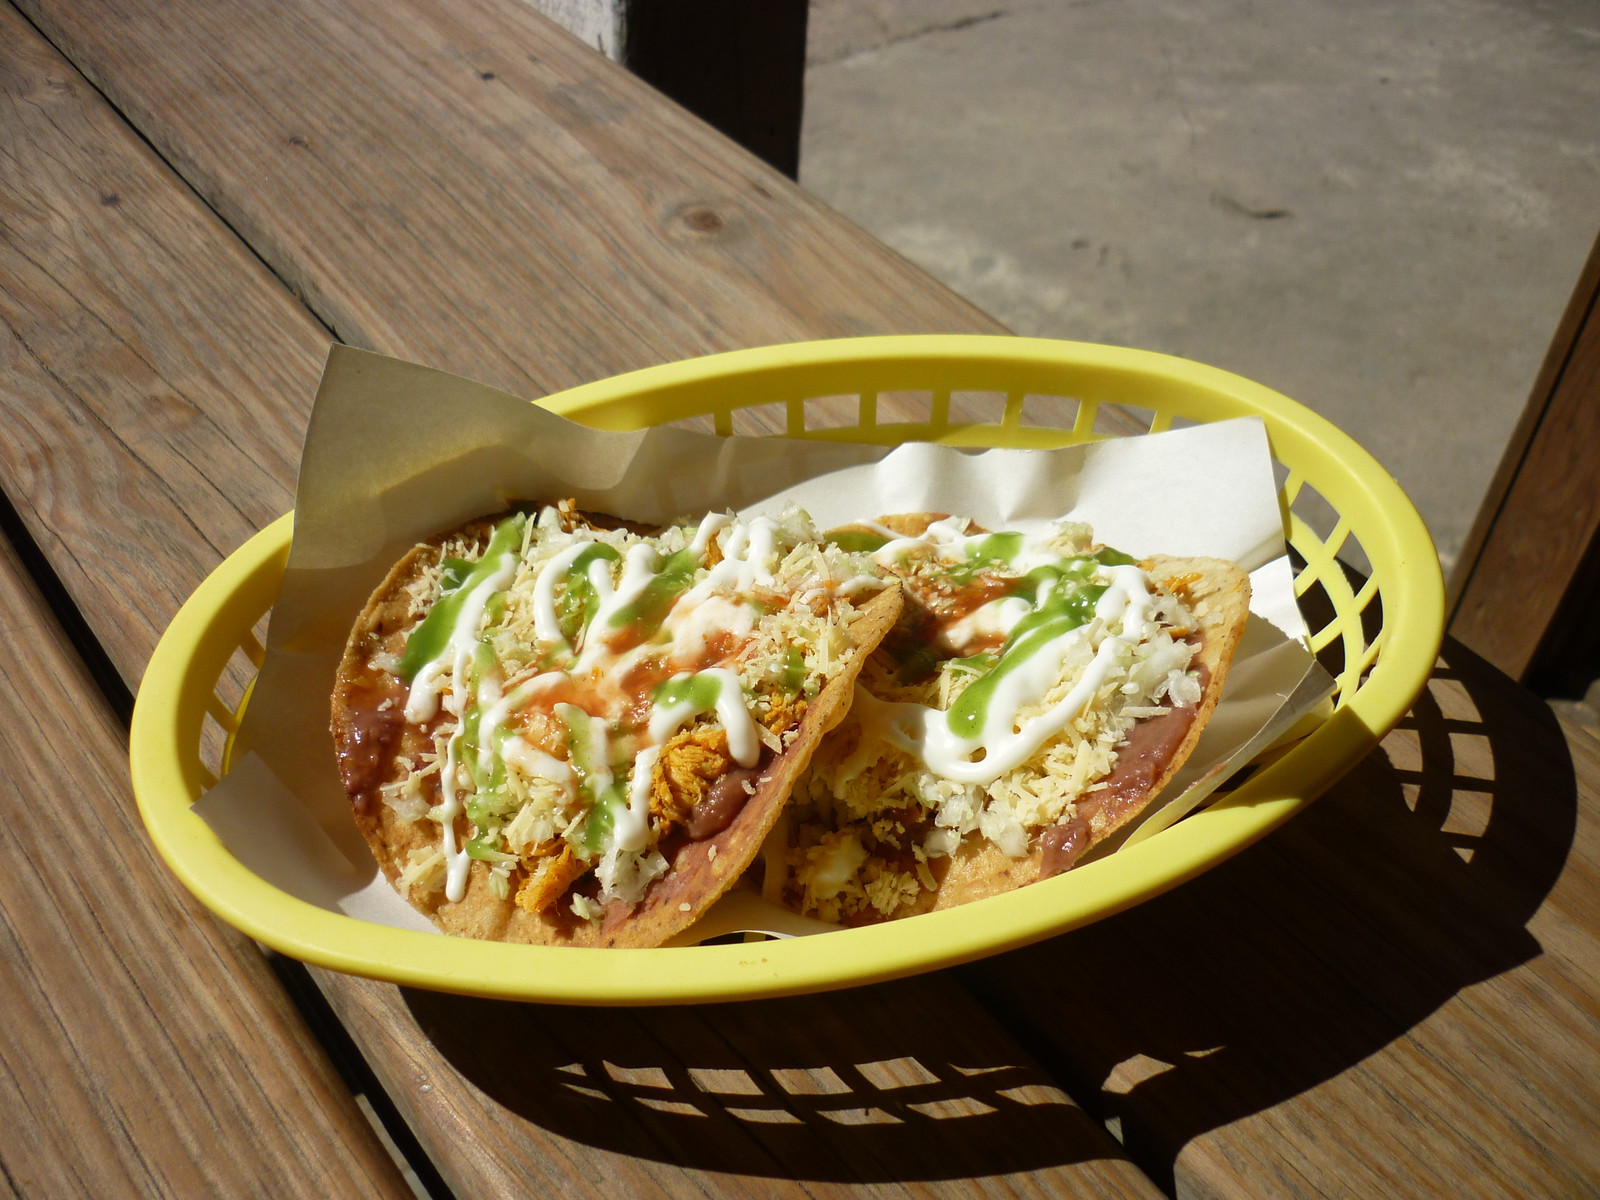 Tostadas from Mickey's Snack Shop on Burns Avenue